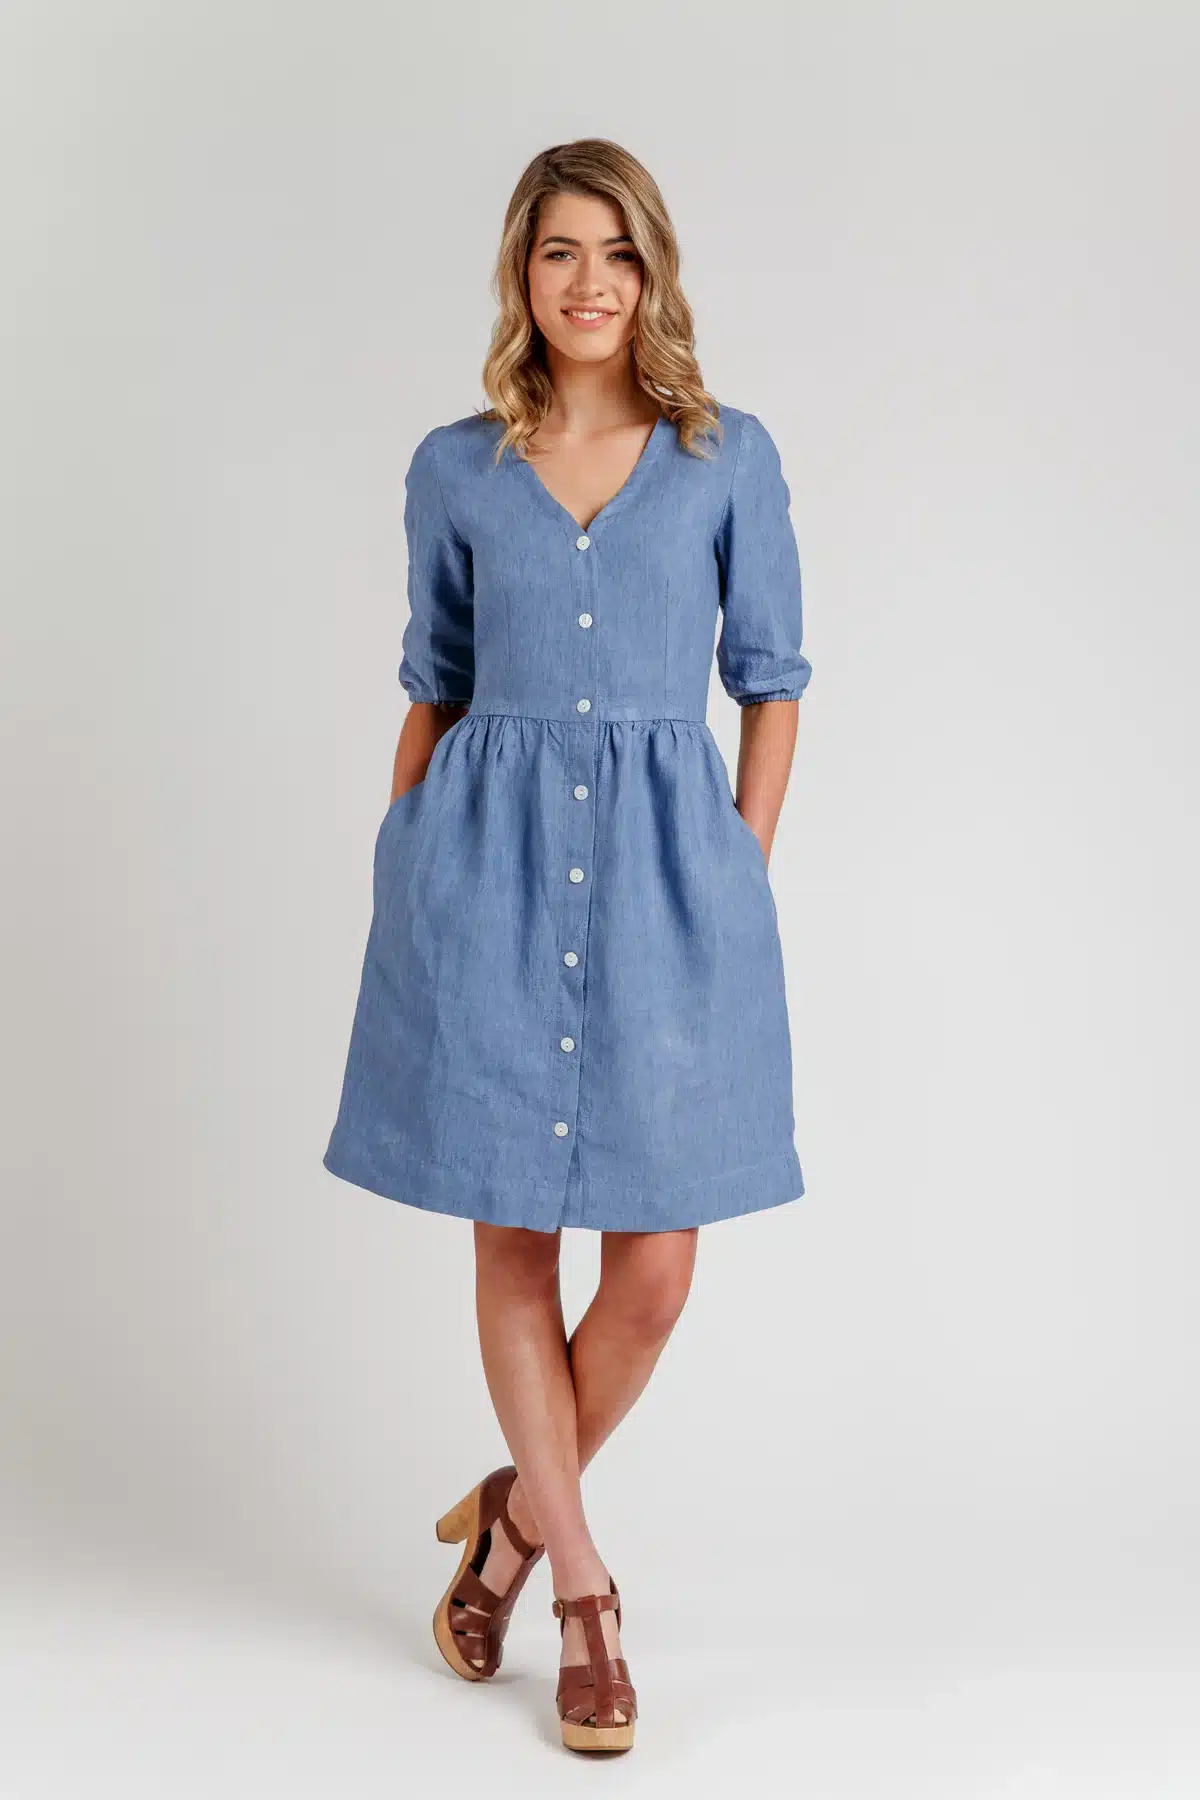 lady modelling an elbow length sleeve chambray dress in blue